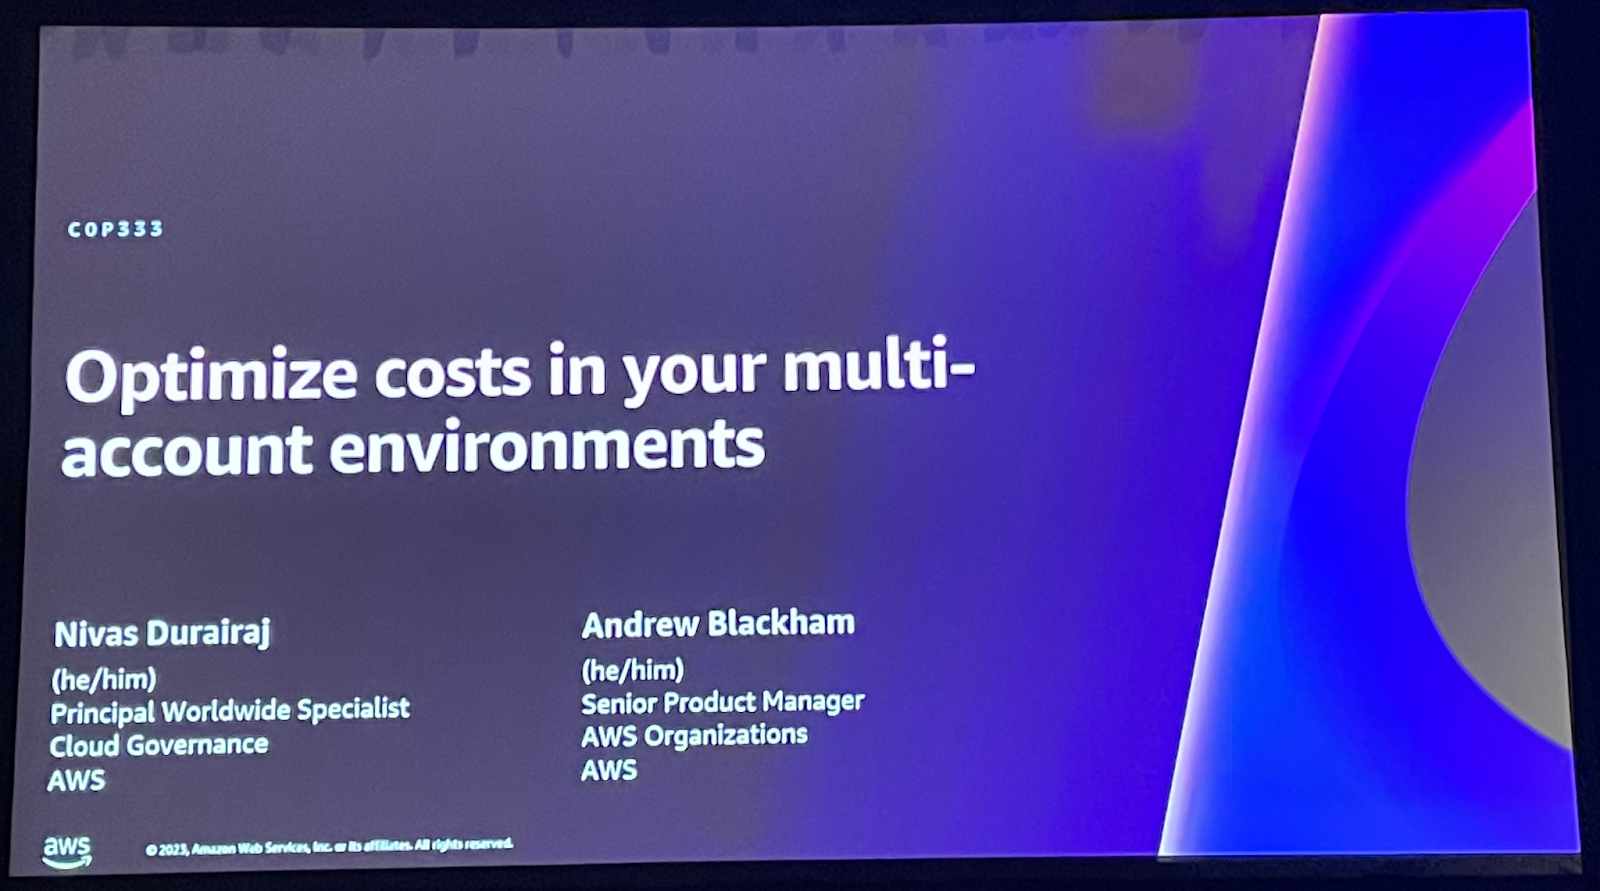 Optimize costs in your multi-account environments